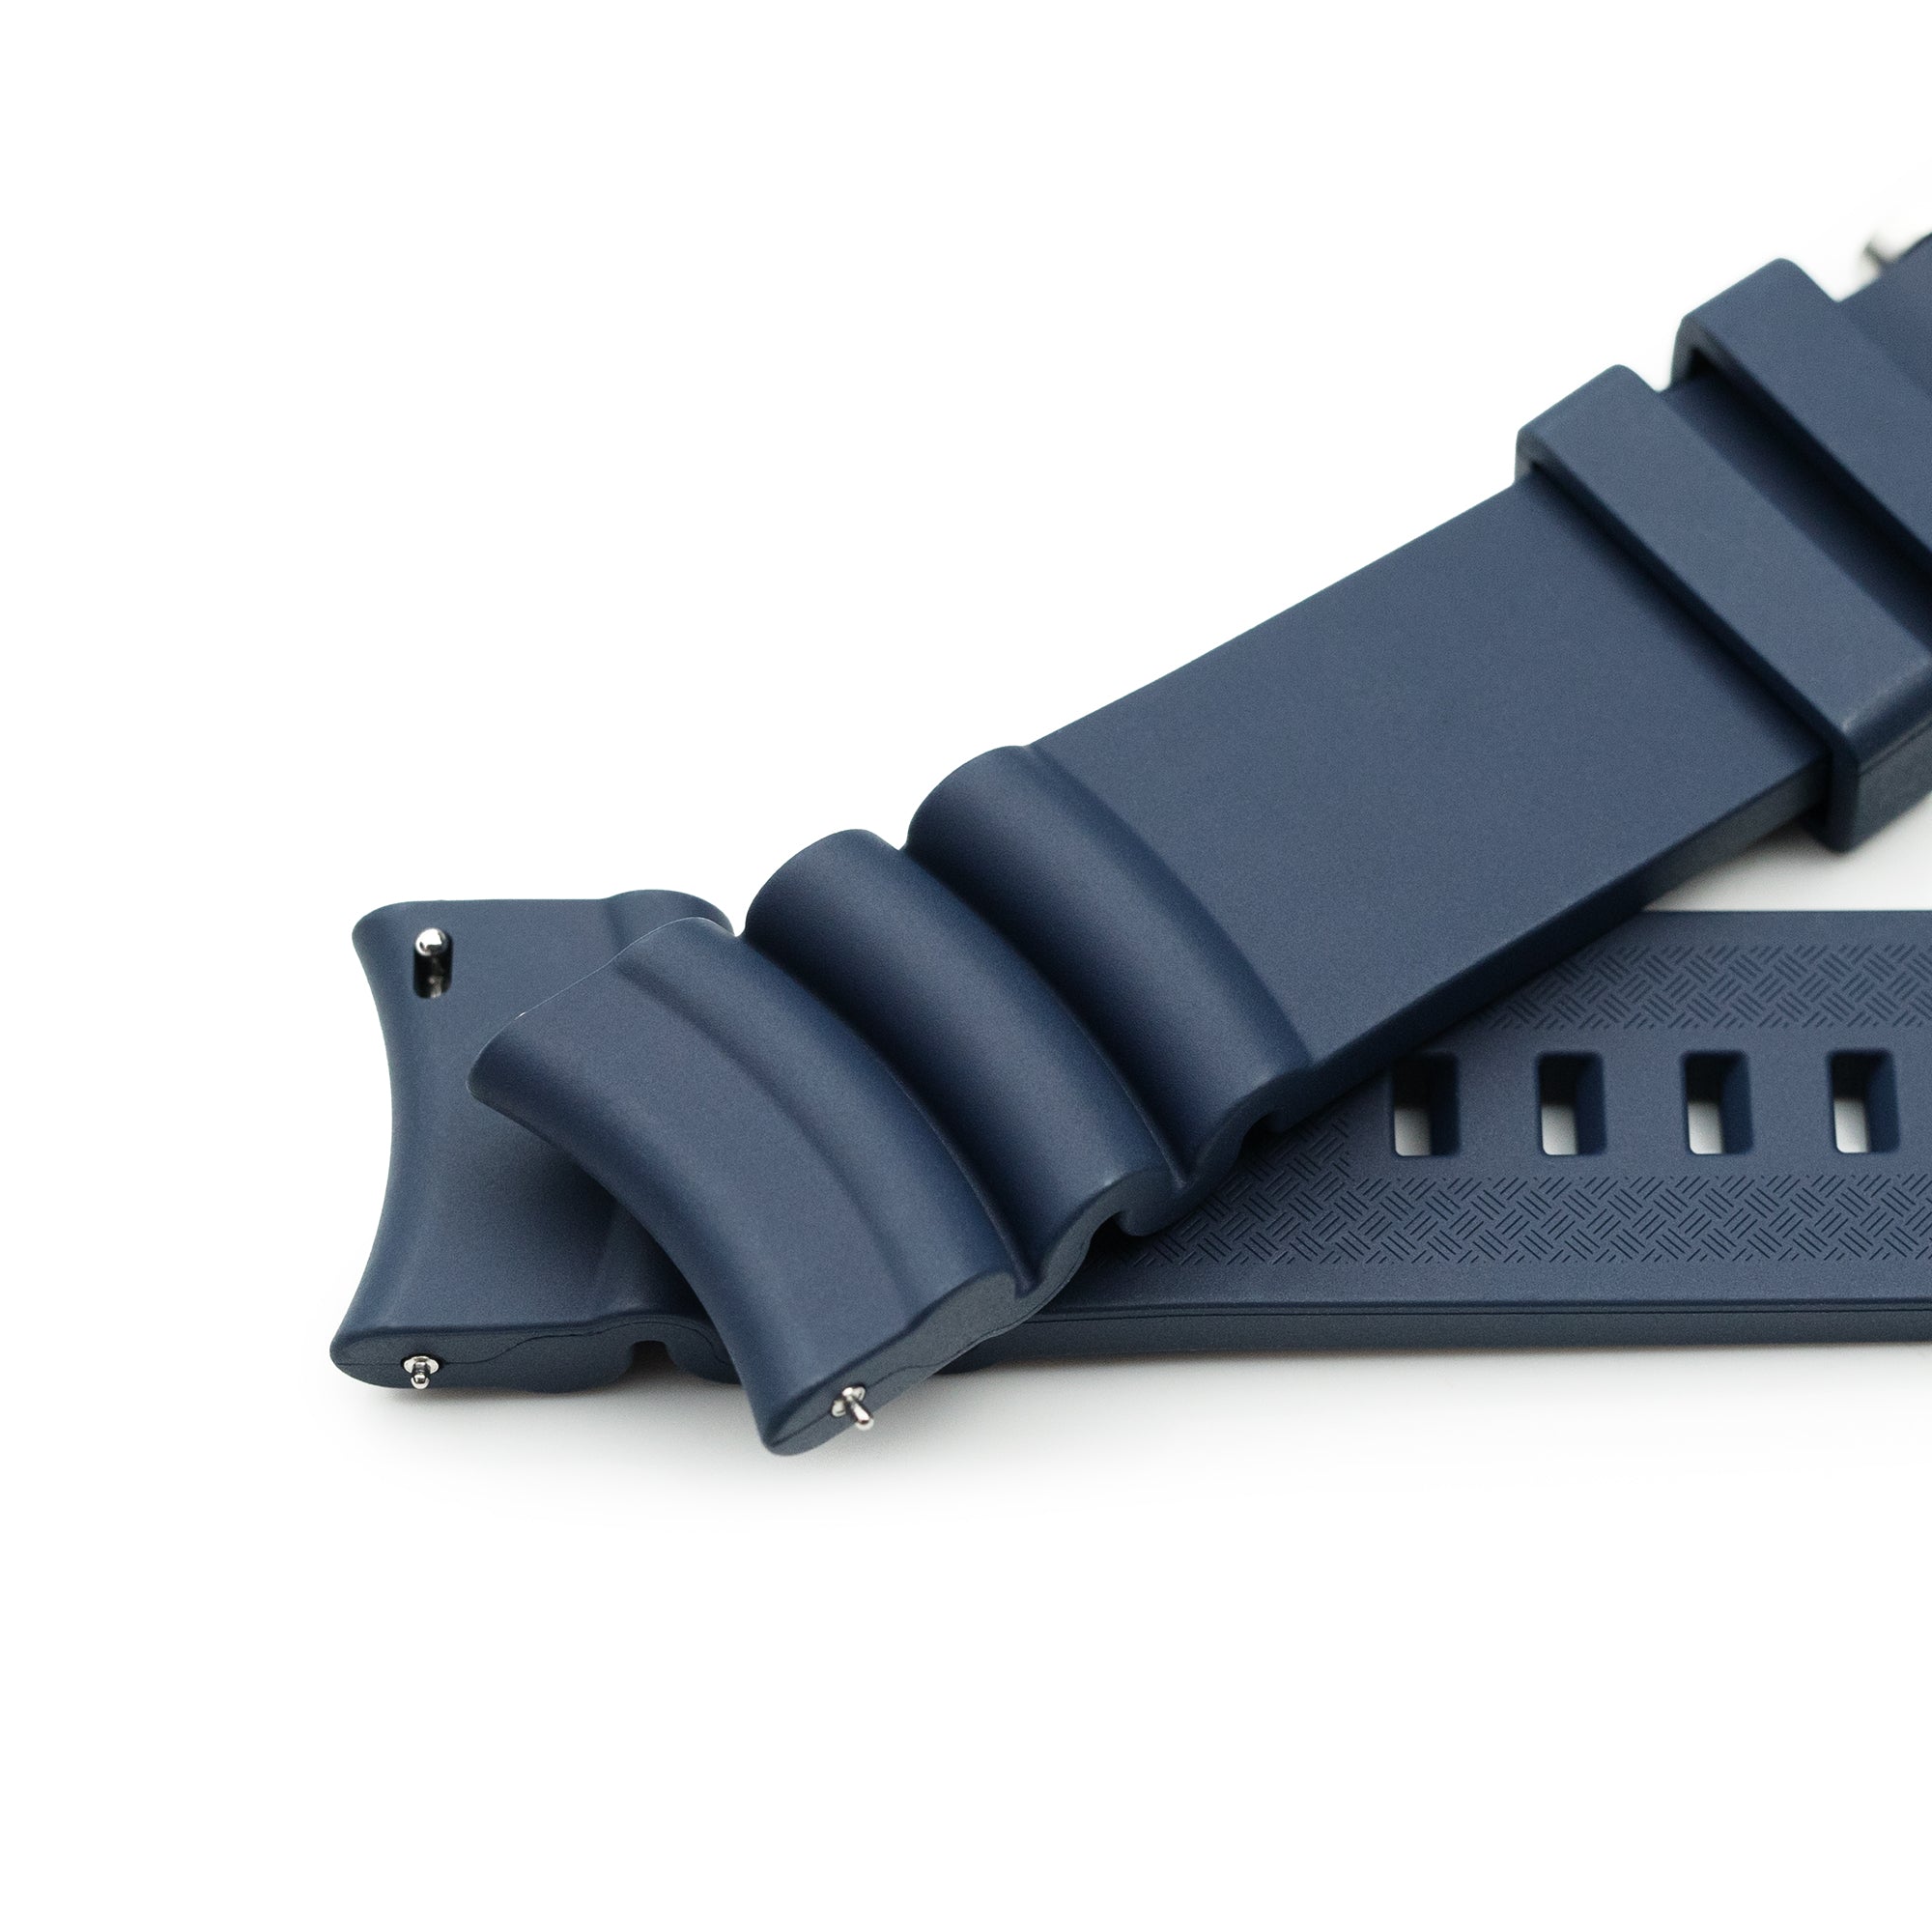 Firewave Resilient Cuved End FKM rubber Watch Strap, Navy Blue Strapcode Watch Bands